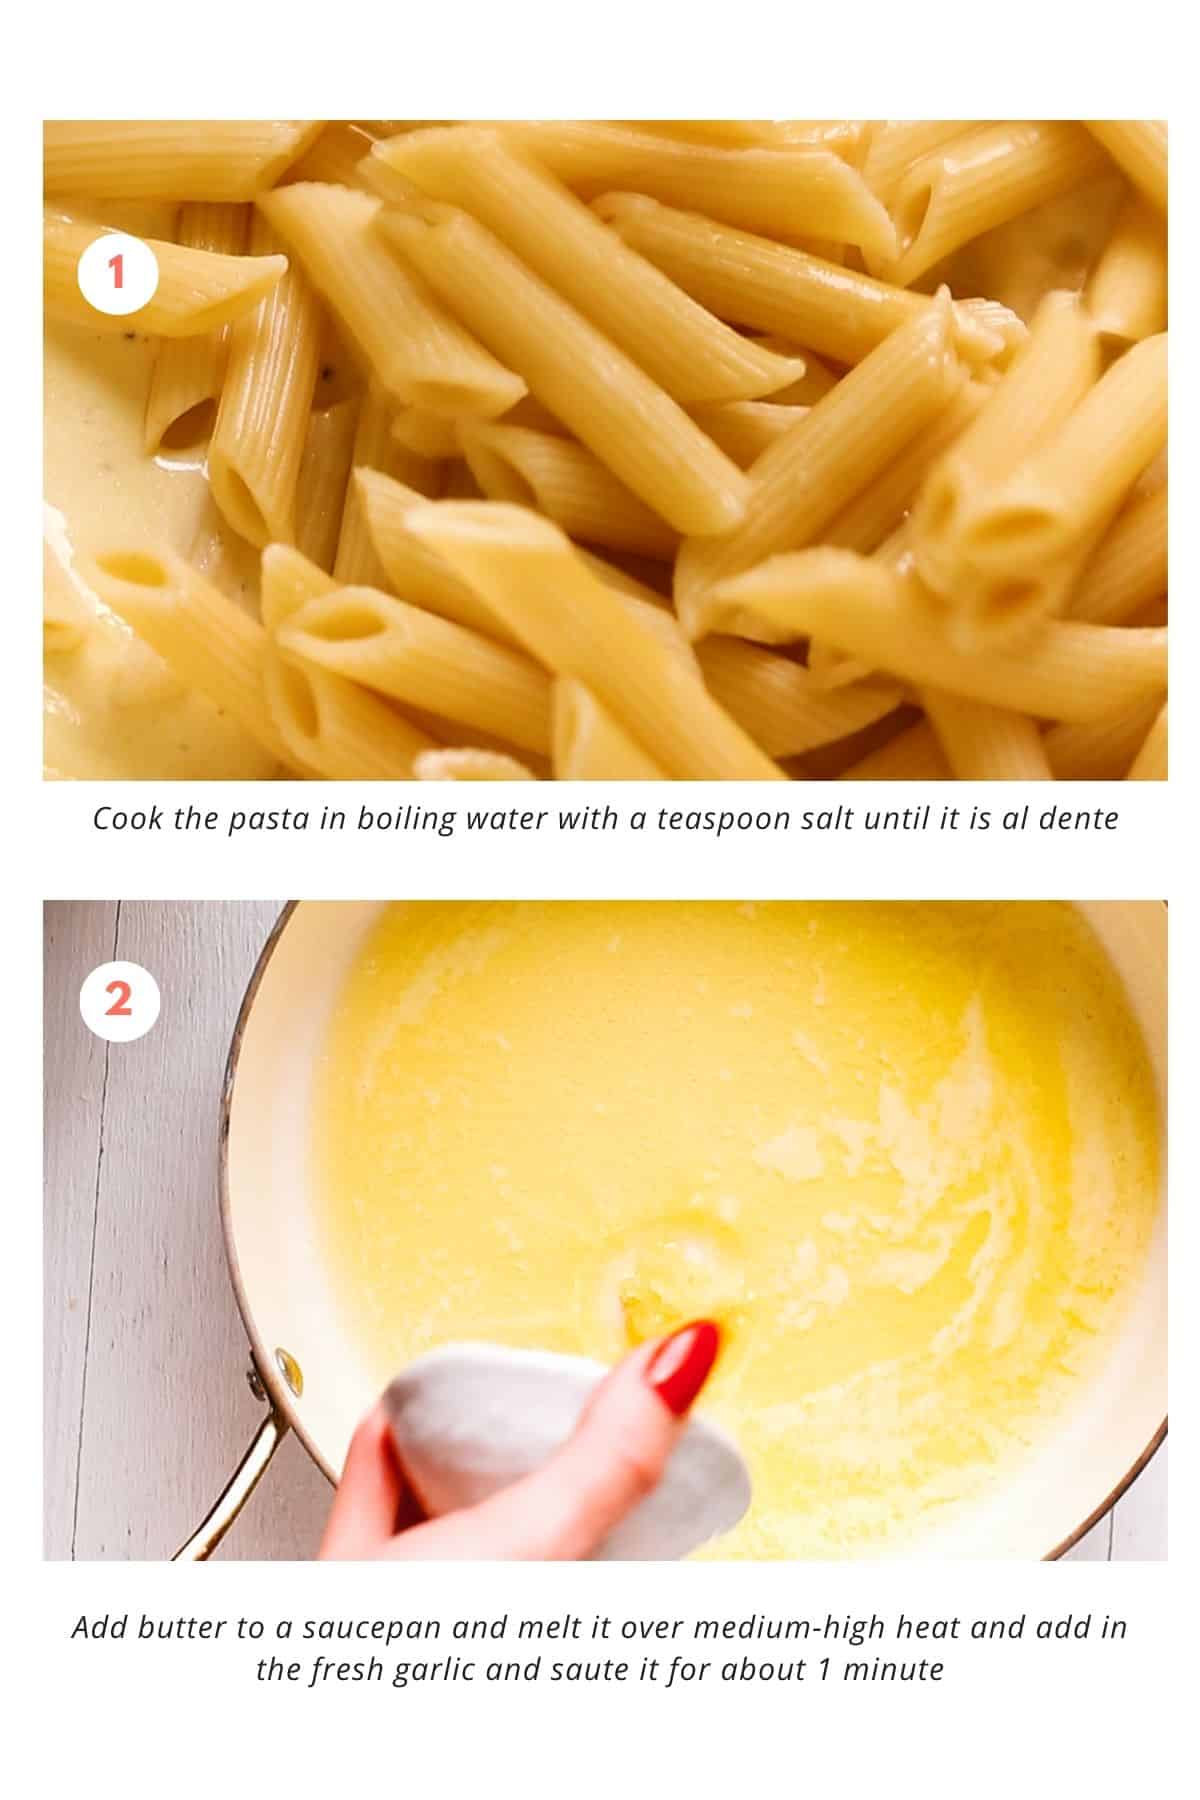 Cook pasta and melt butter in pan